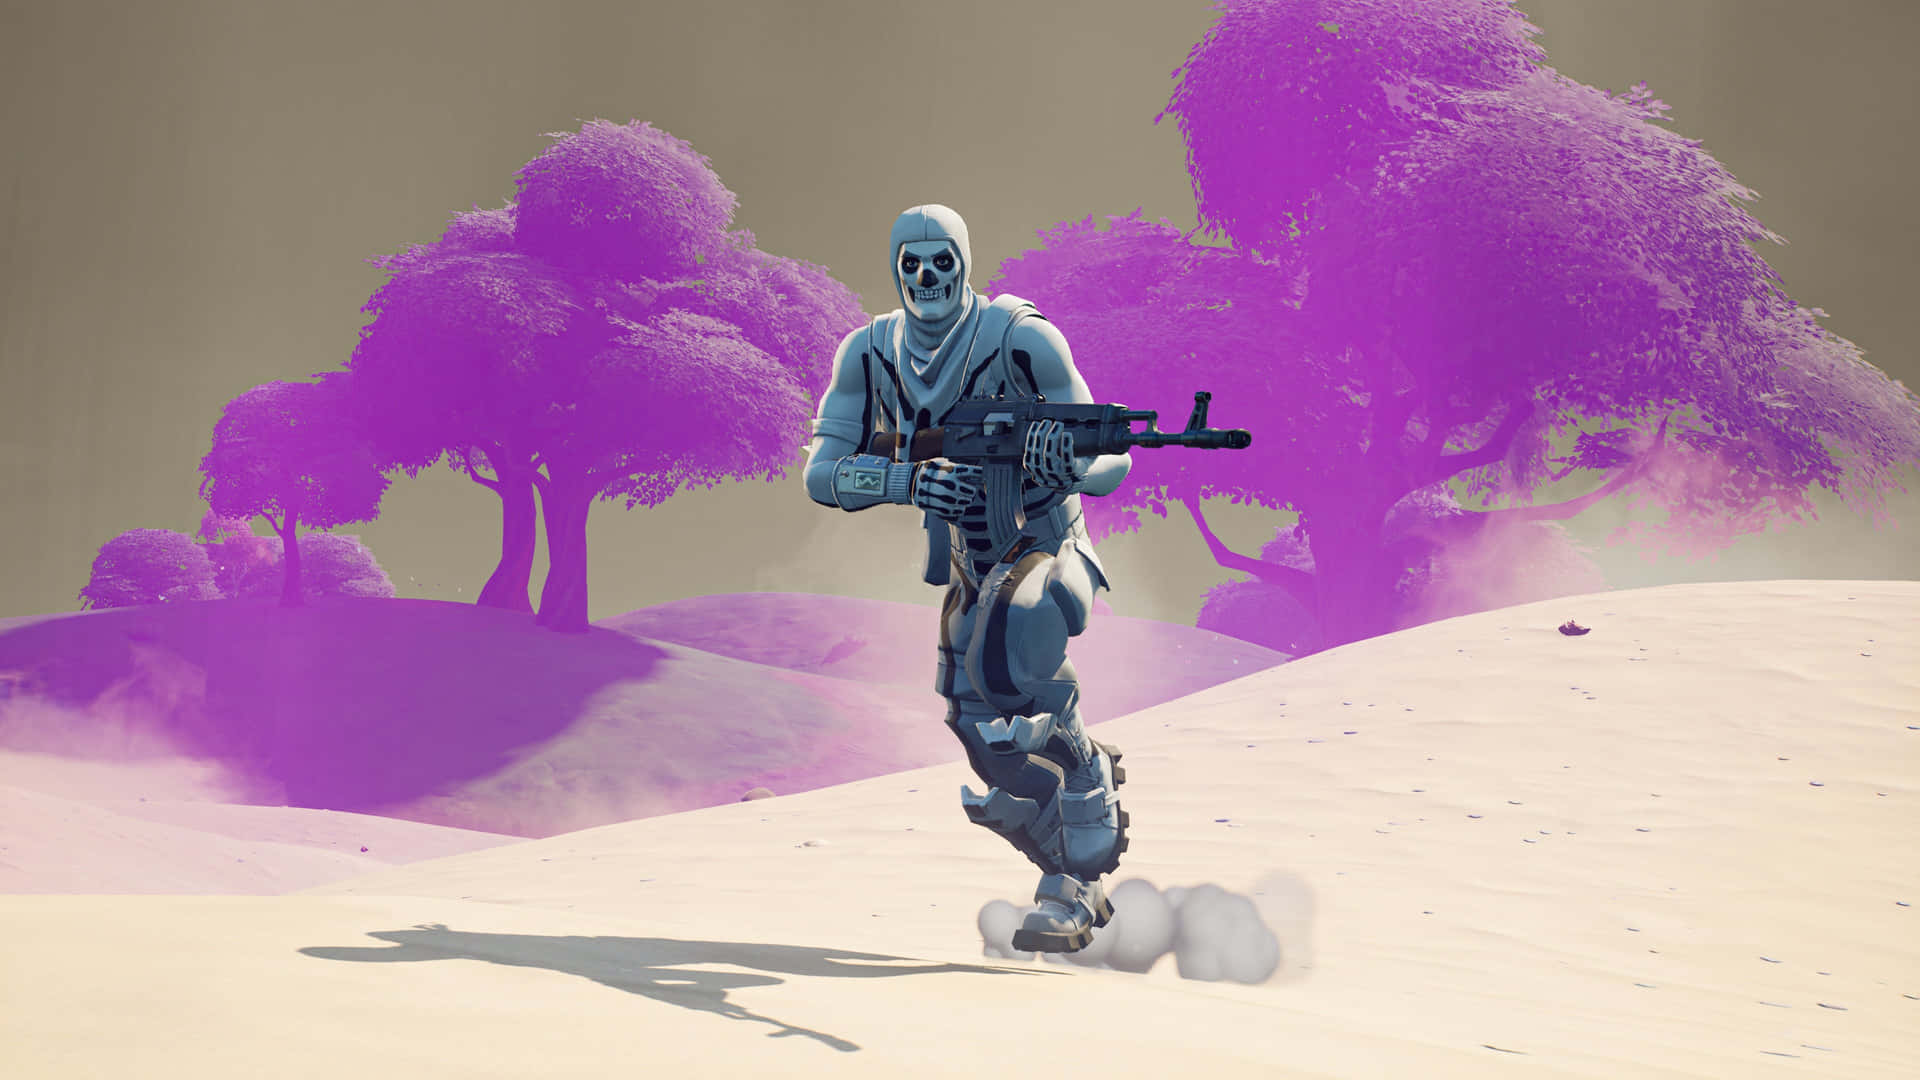 Fortniteen Man I En Lila Kostym Som Står I Öknen. (note: The Swedish Language Doesn't Have Specific Terms For Computer/mobile Wallpaper So This Is The Most Accurate Translation In This Context) Wallpaper